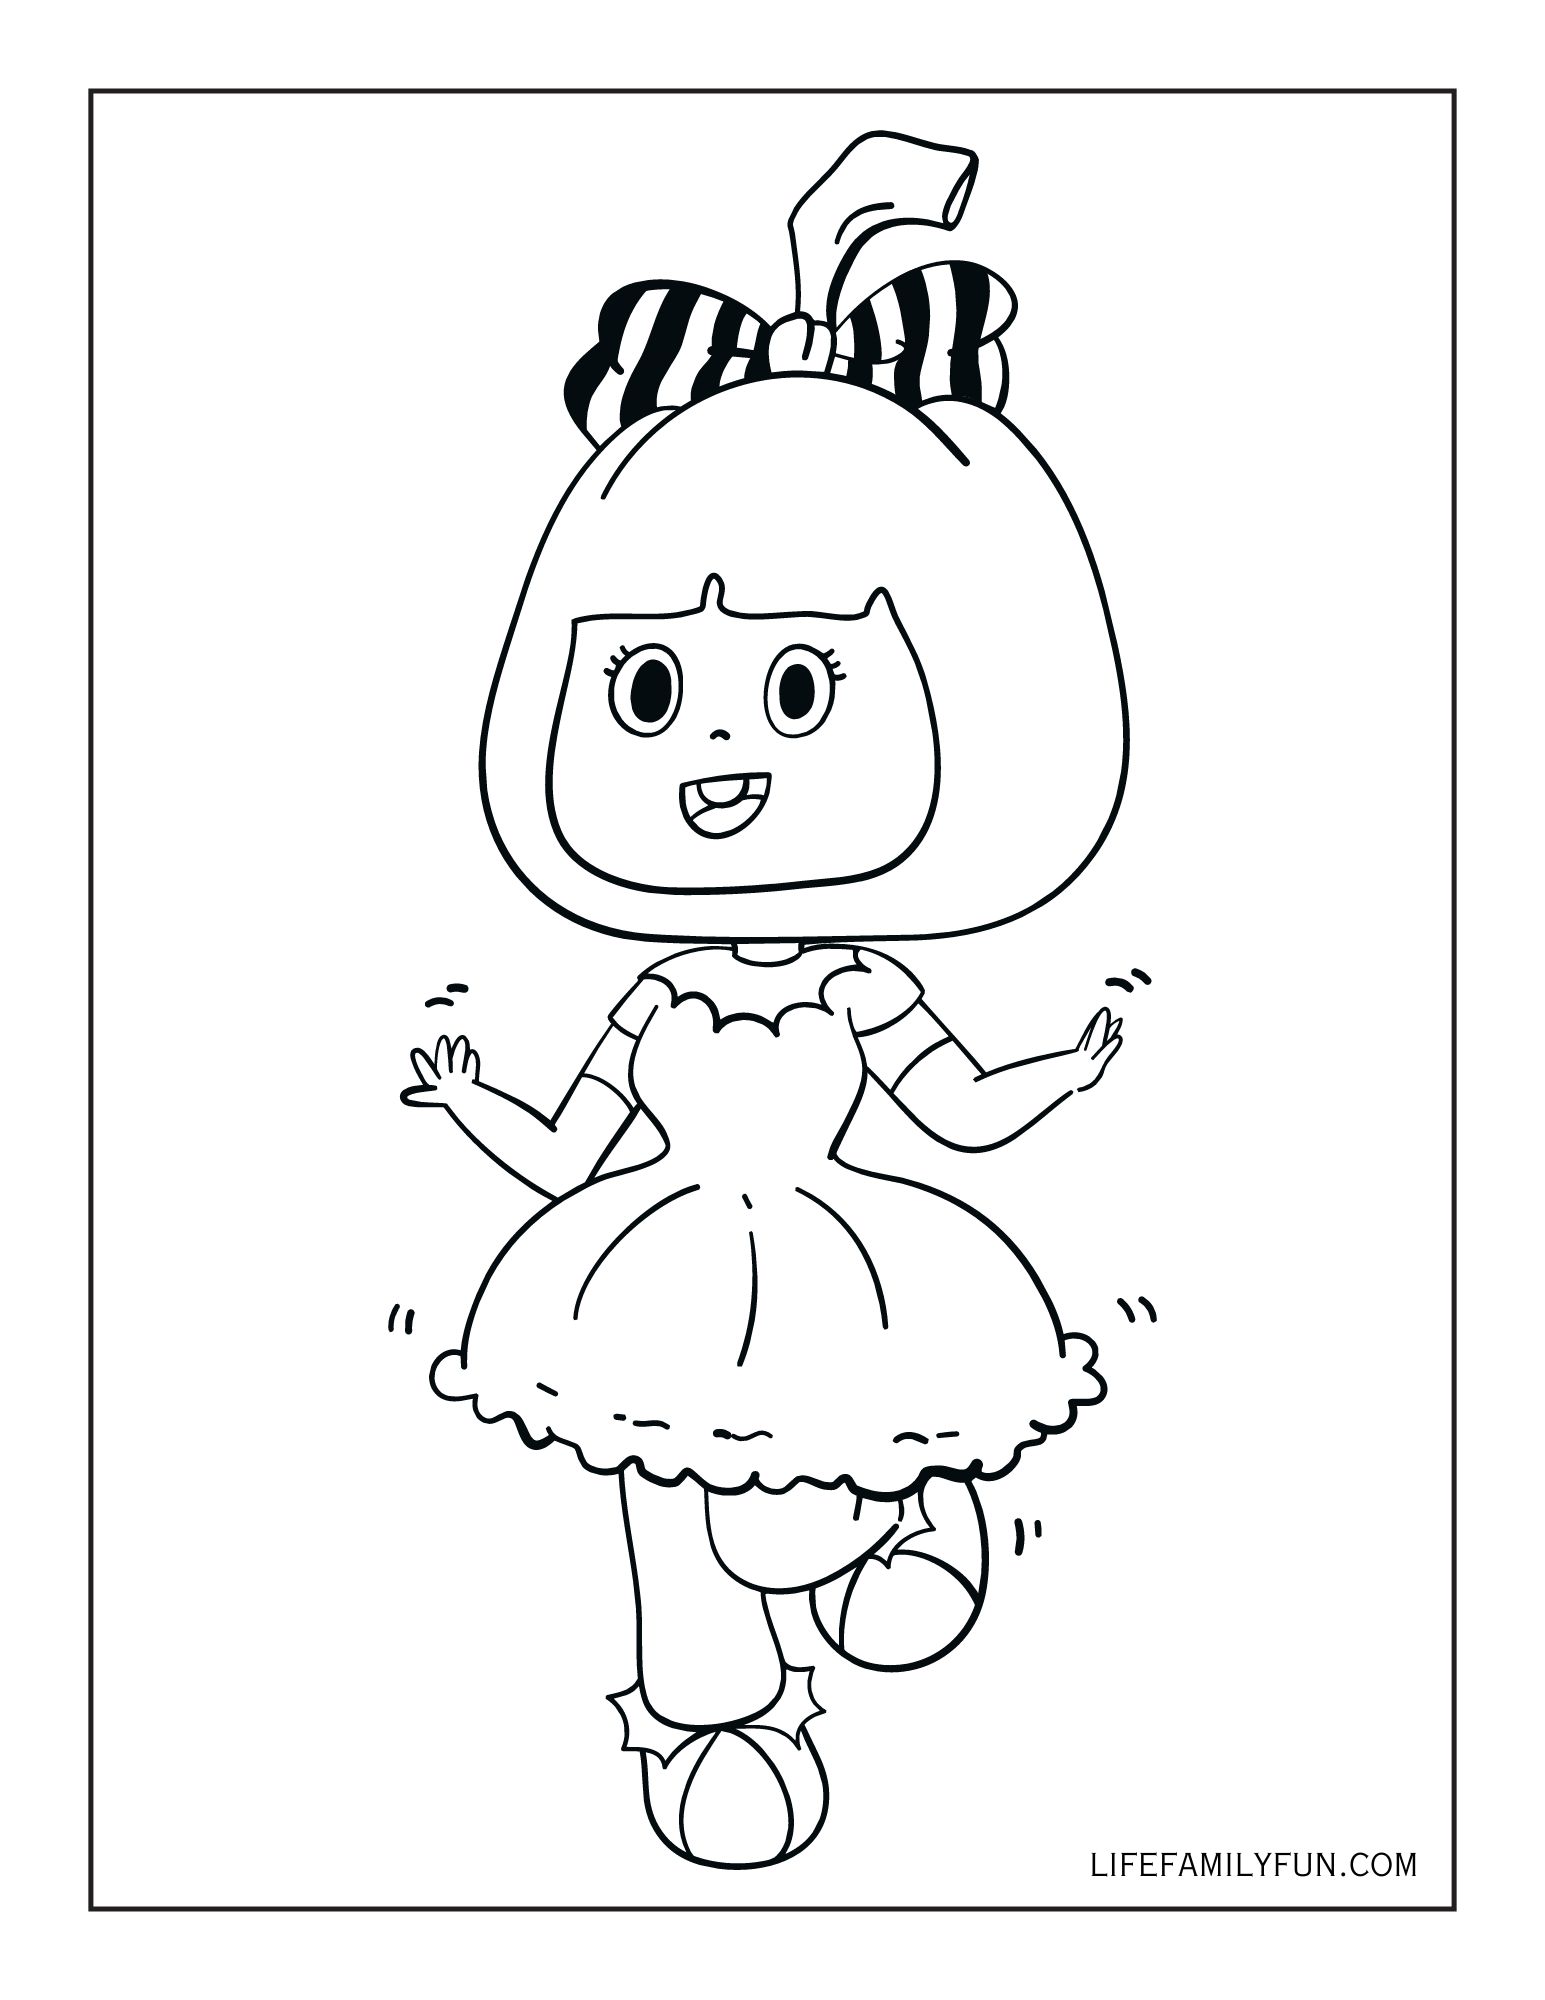 Coloring page for Halloween Party